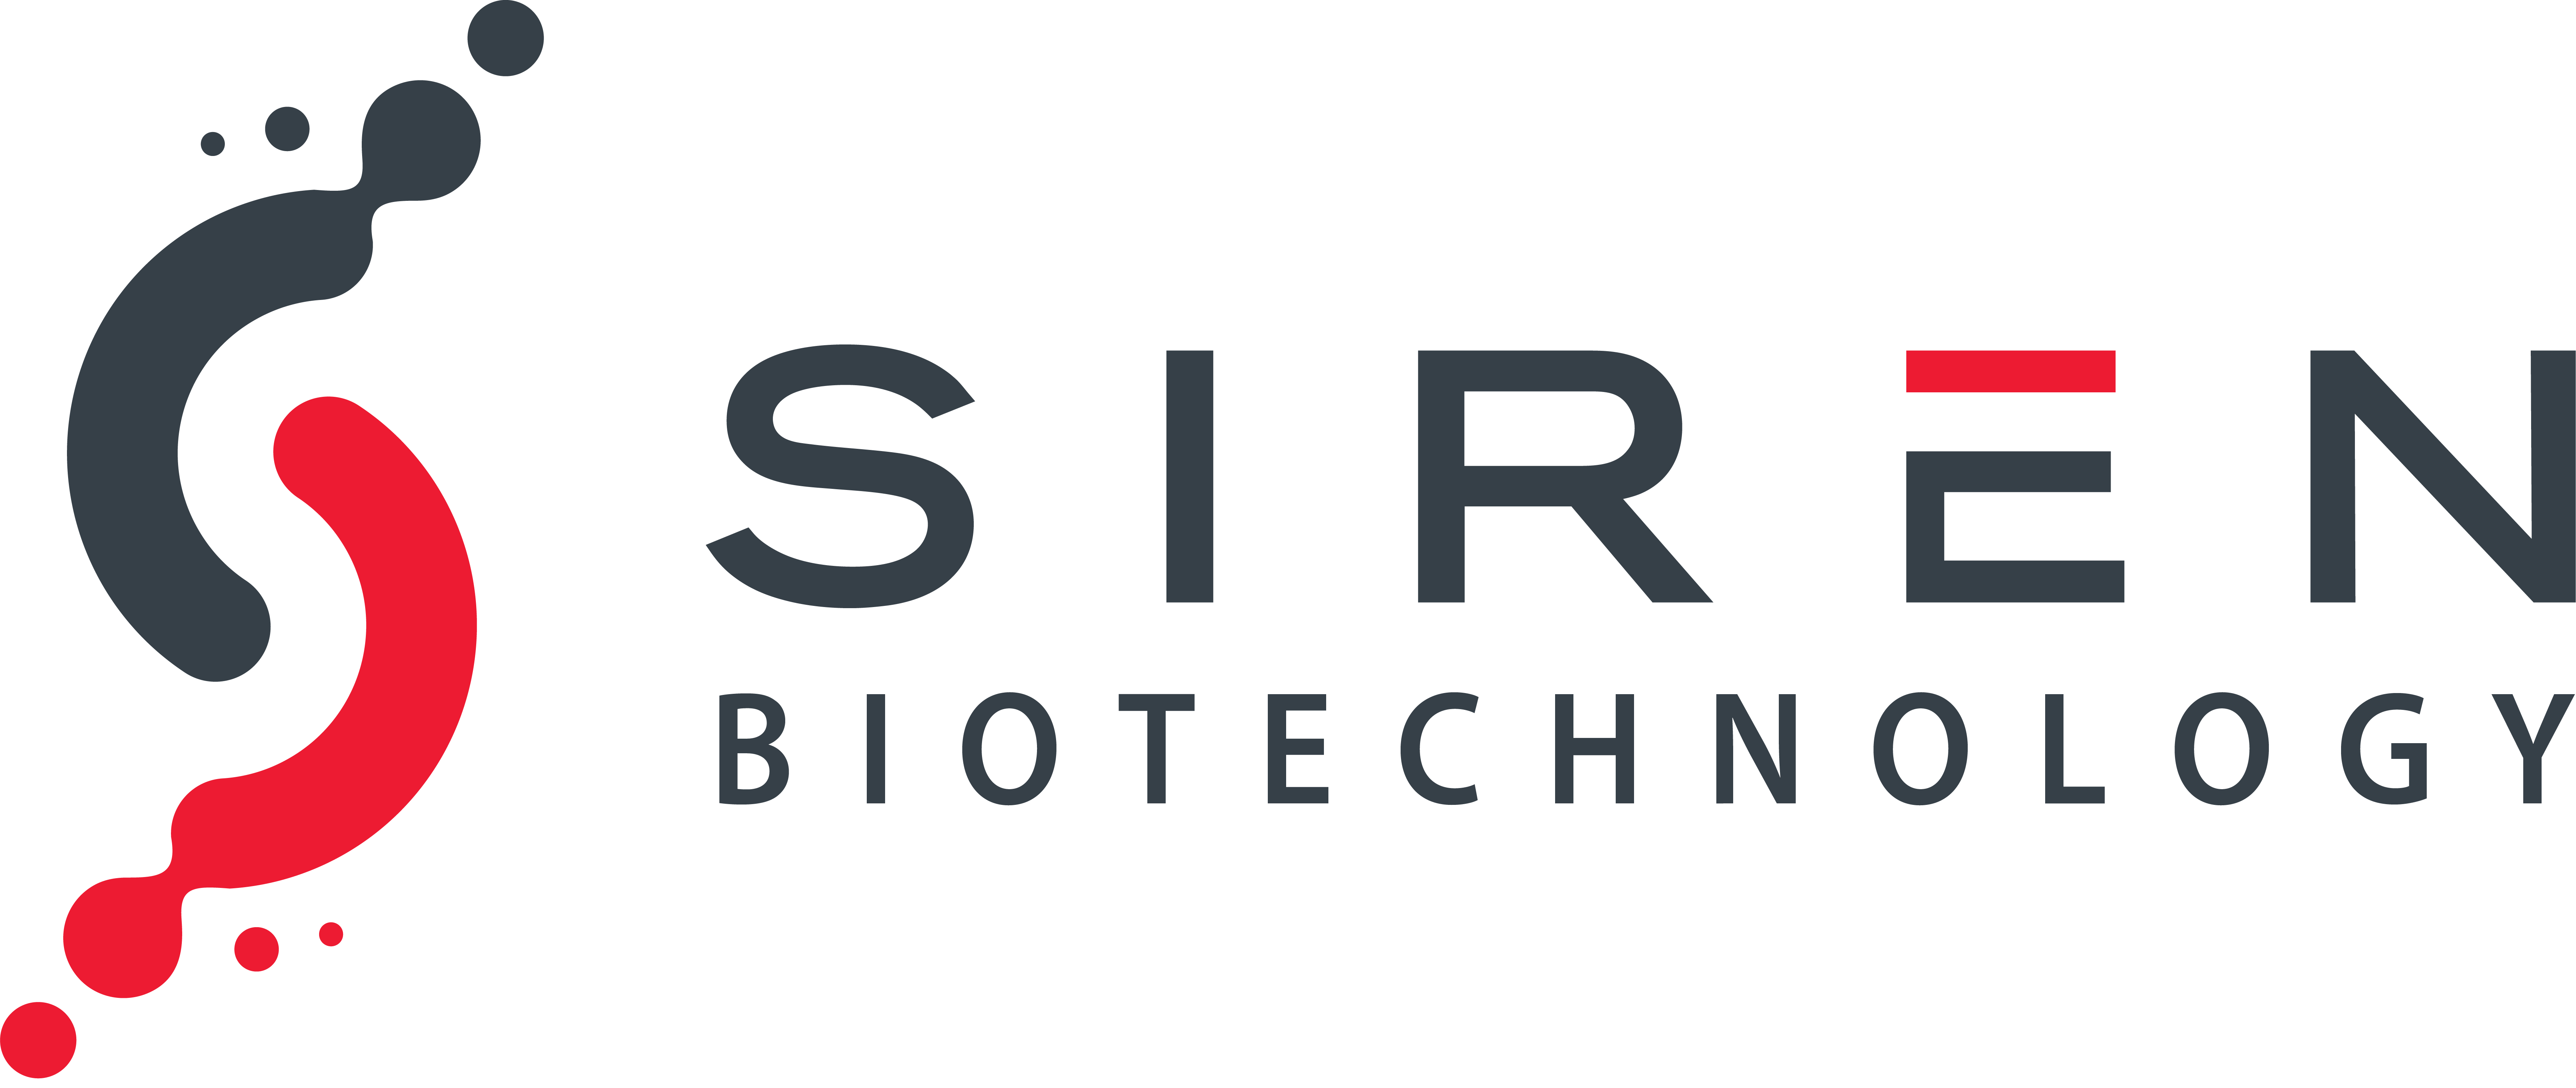 Siren Biotechnology Unveils Preclinical Data for Universal AAV Immuno-Gene Therapy™ for Cancer, a Novel Modality that Combines AAV Gene Therapy and Cytokine Immunotherapy